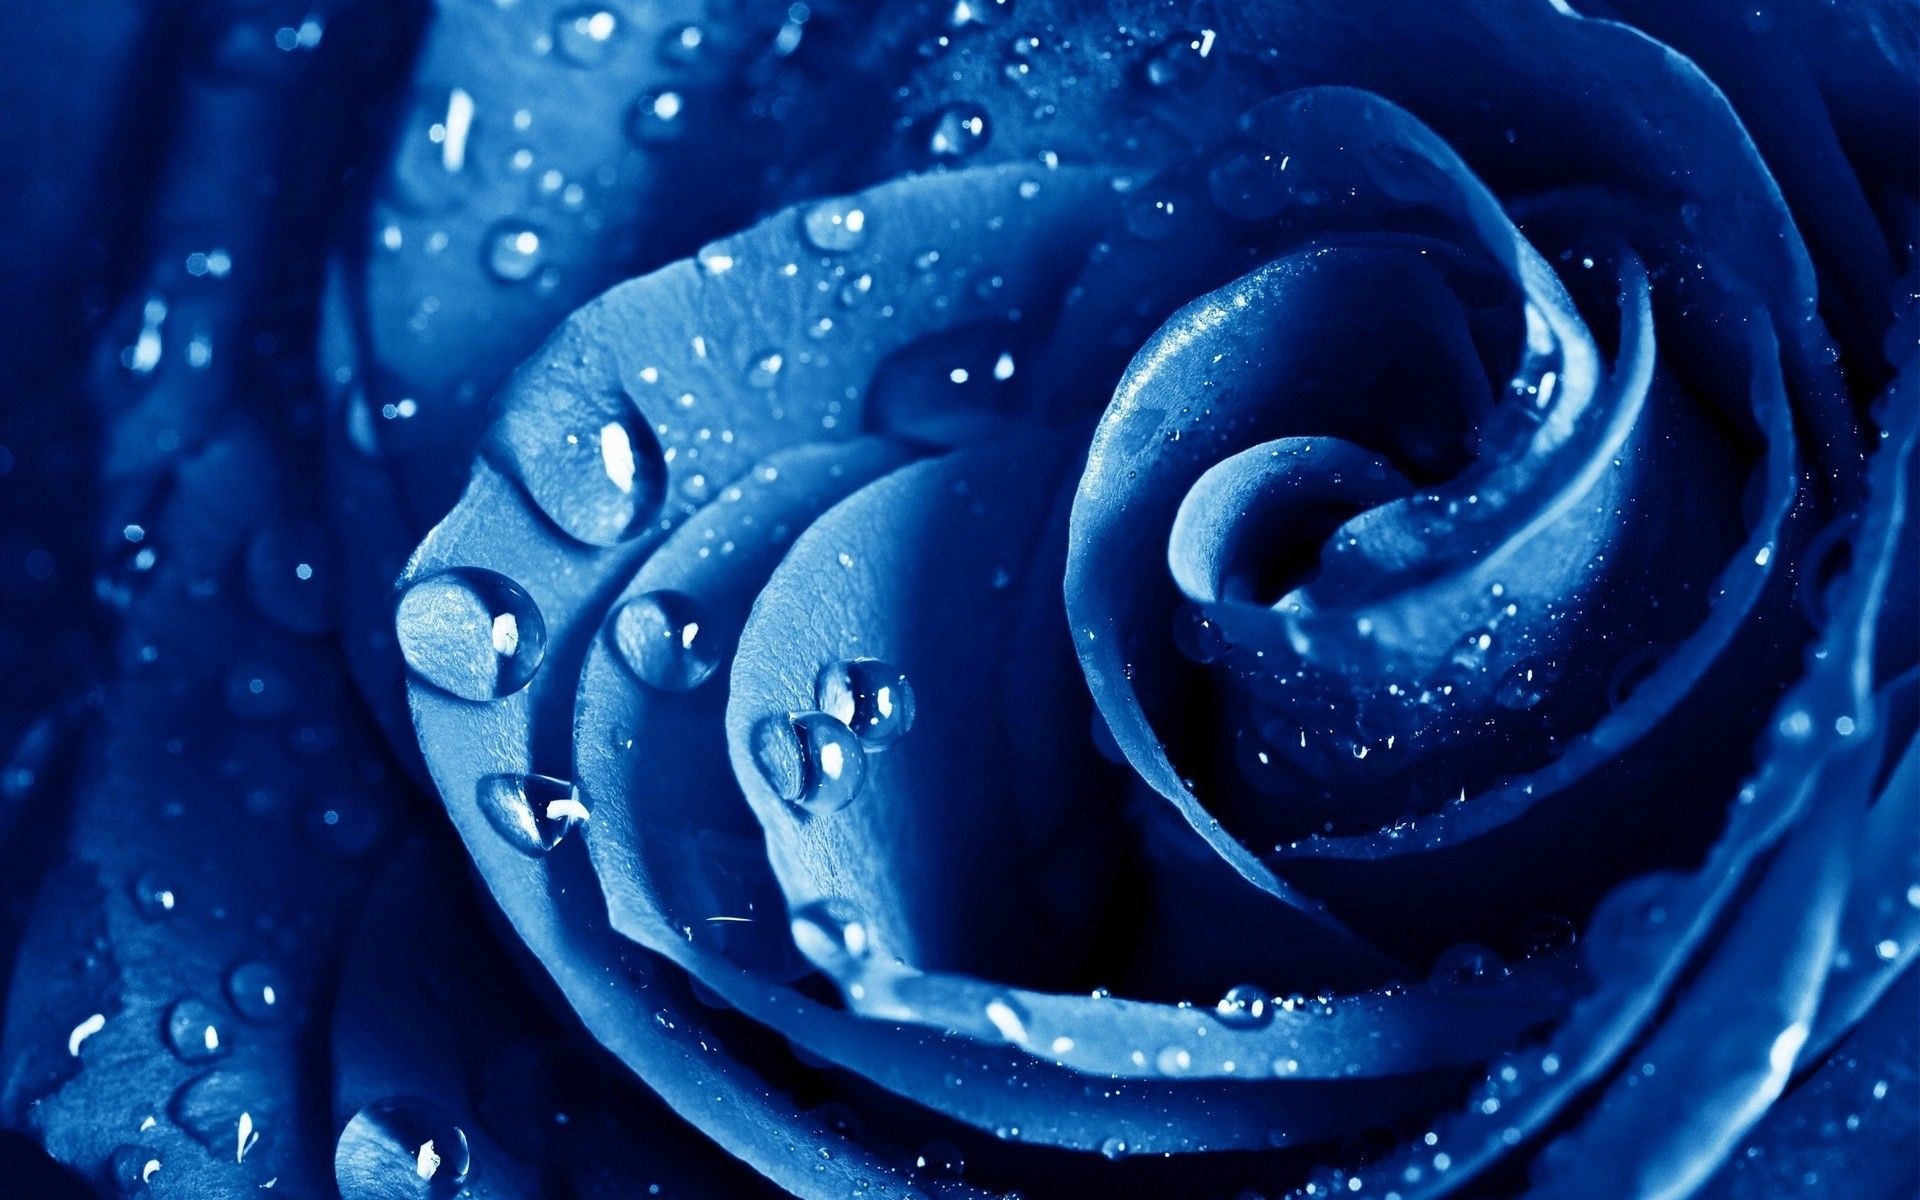 1920x1200 Hd Wallpapers Of Flowers With Black Background The Best Flowers 1920Ã1200  Rose With Water Drops Wallpapers (39 Wallpapers) | Adorable Wallpapers